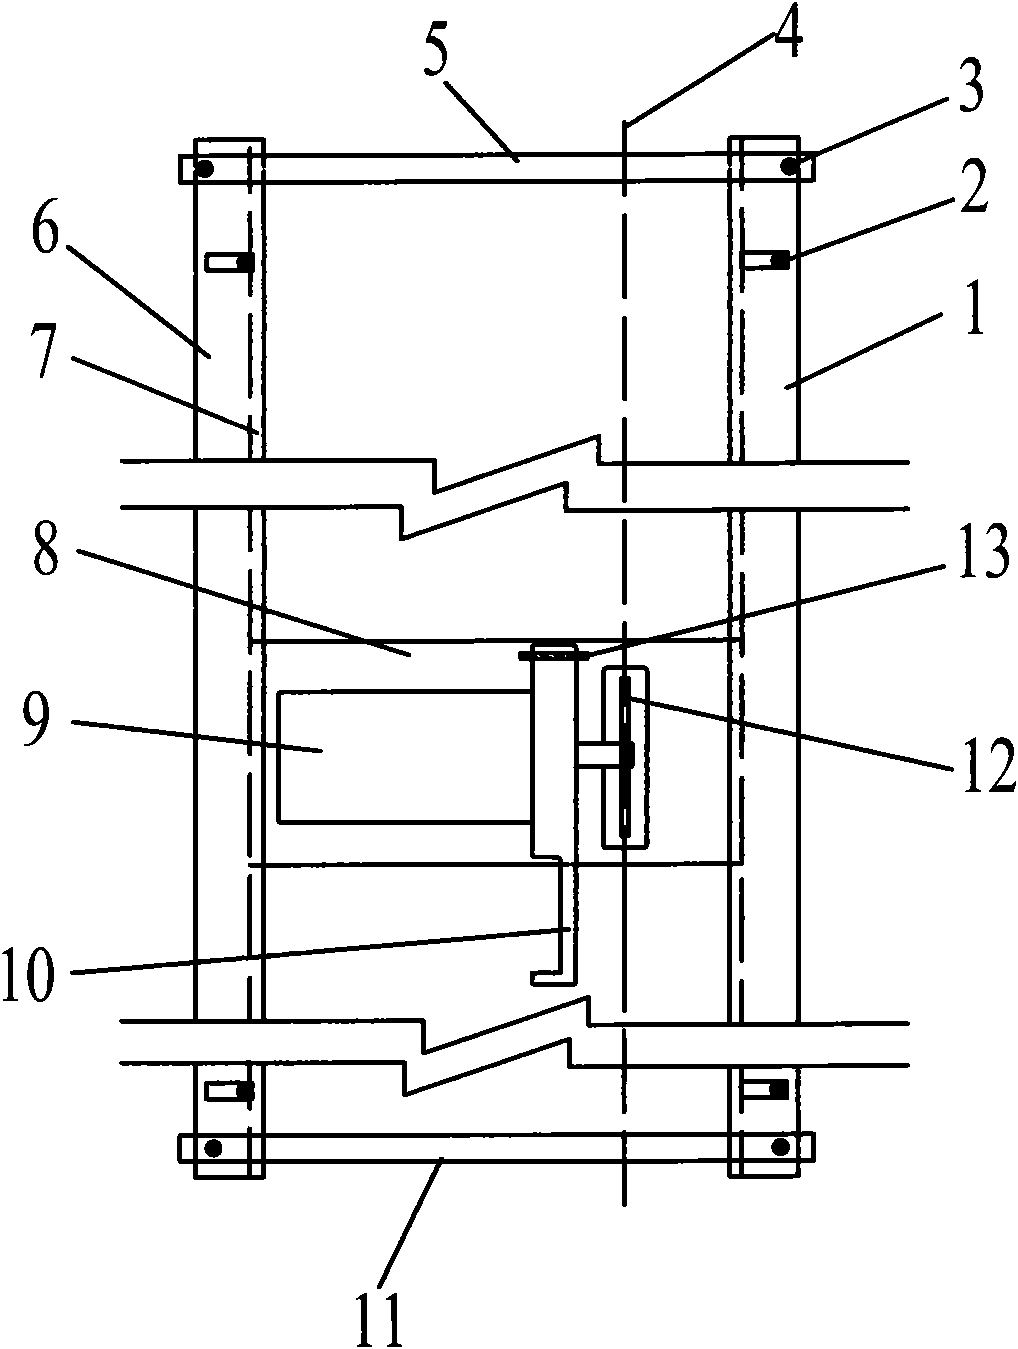 Concrete lining cutting device